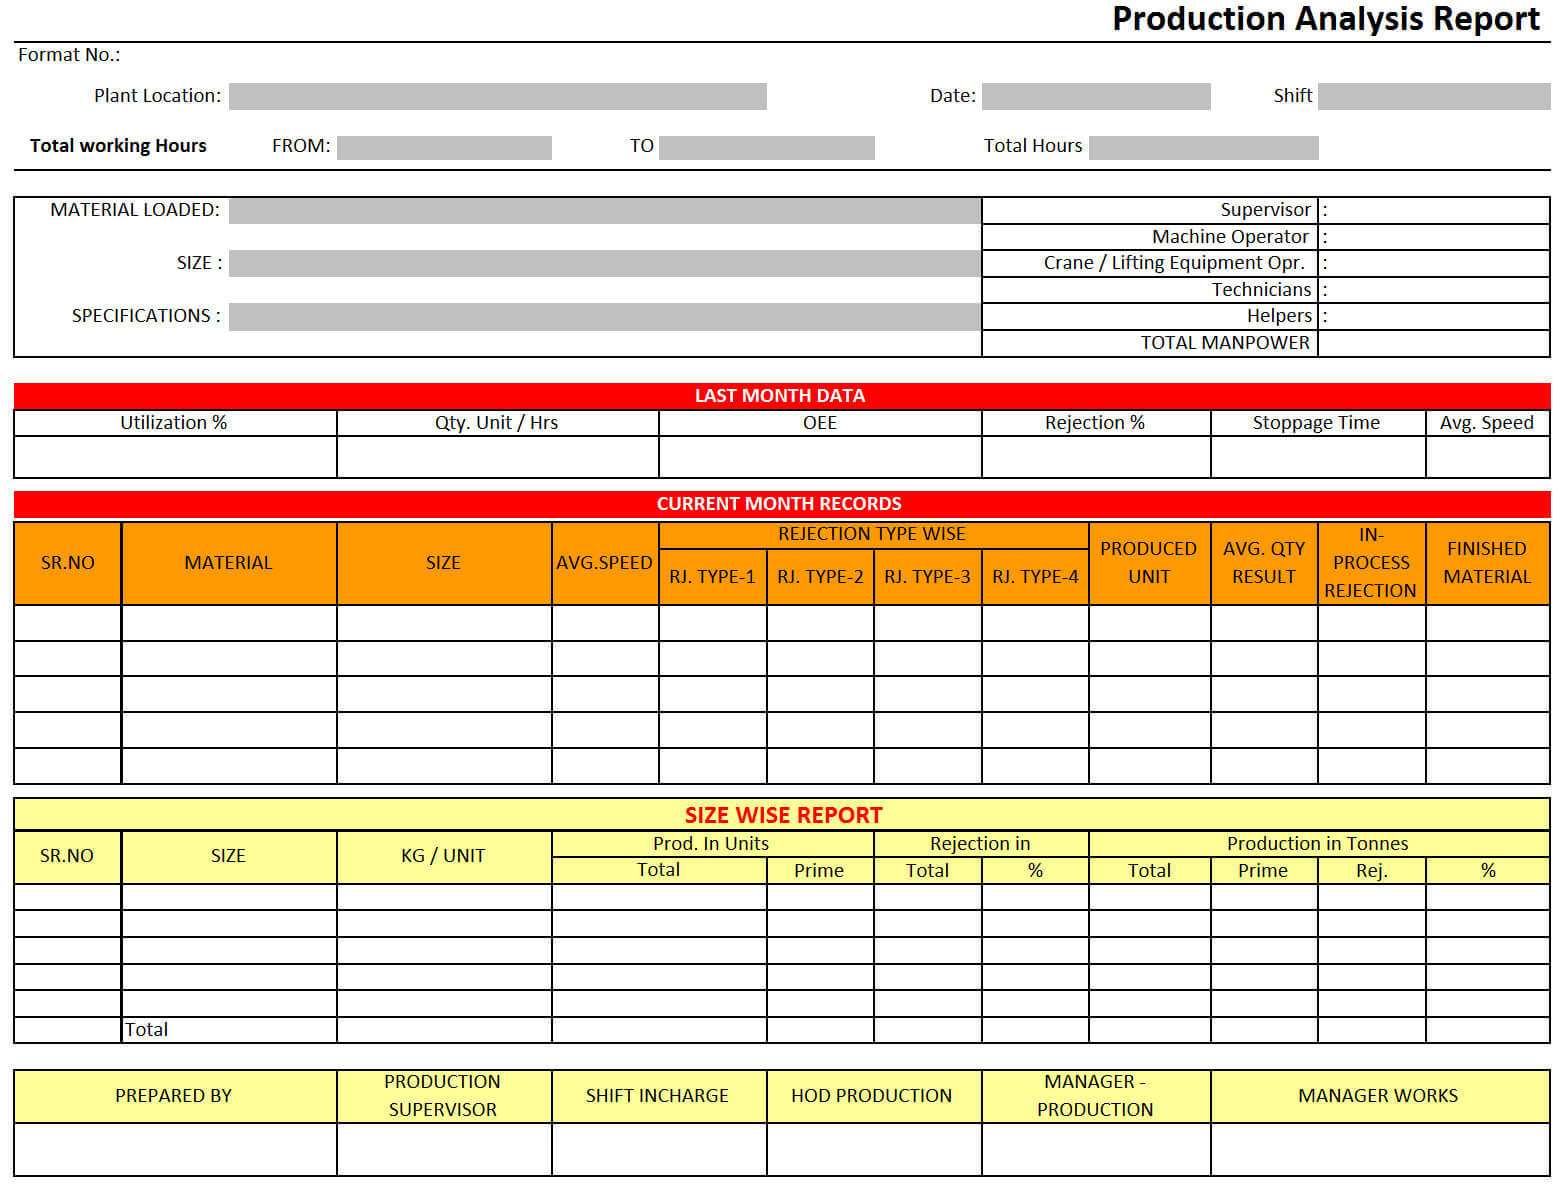 Production Analysis Report – Inside Company Analysis Report Template